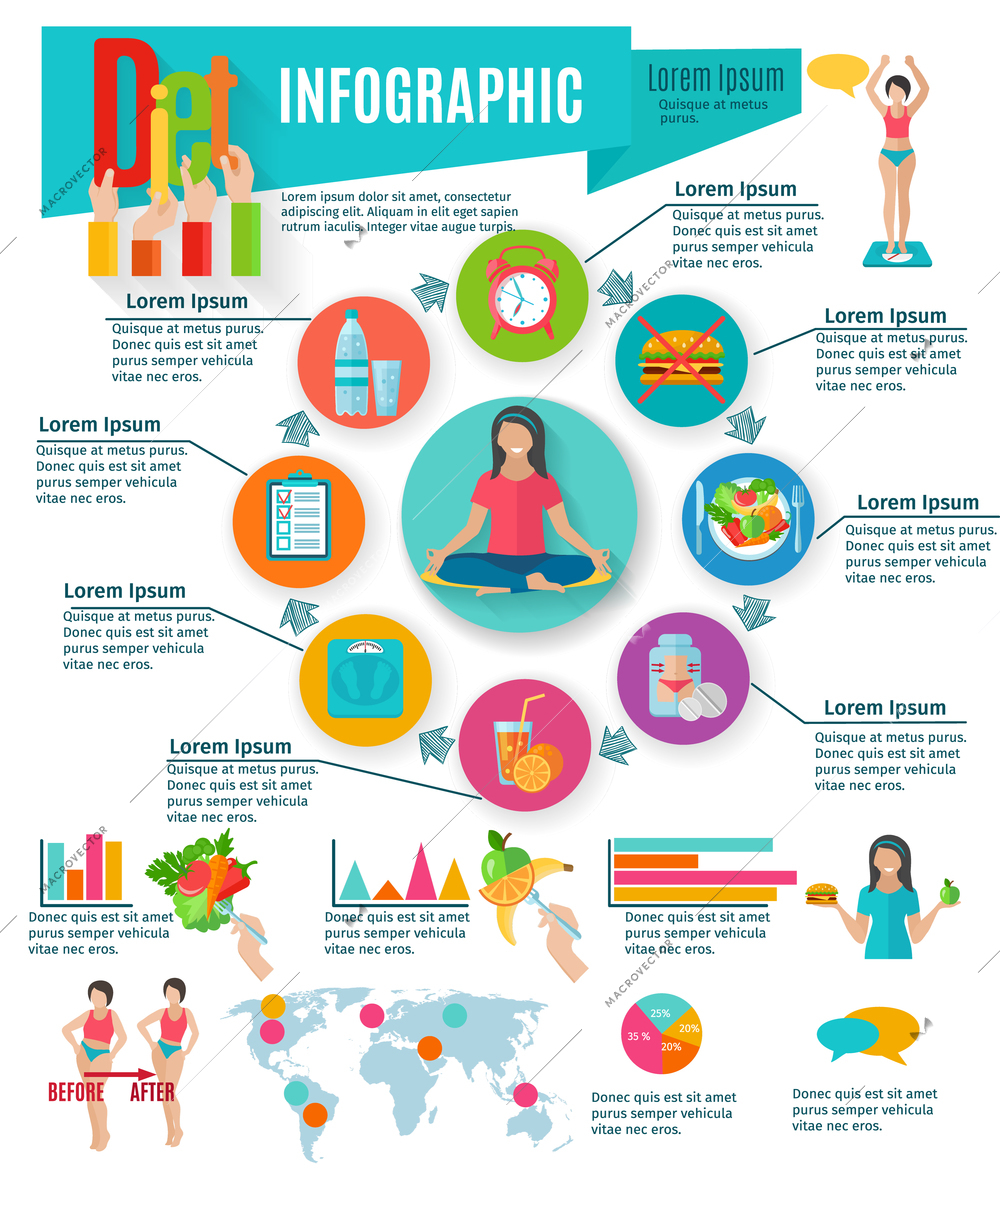 Healthy life diet and weight maintain choices statistic charts infographic presentation layout design abstract isolated vector illustration